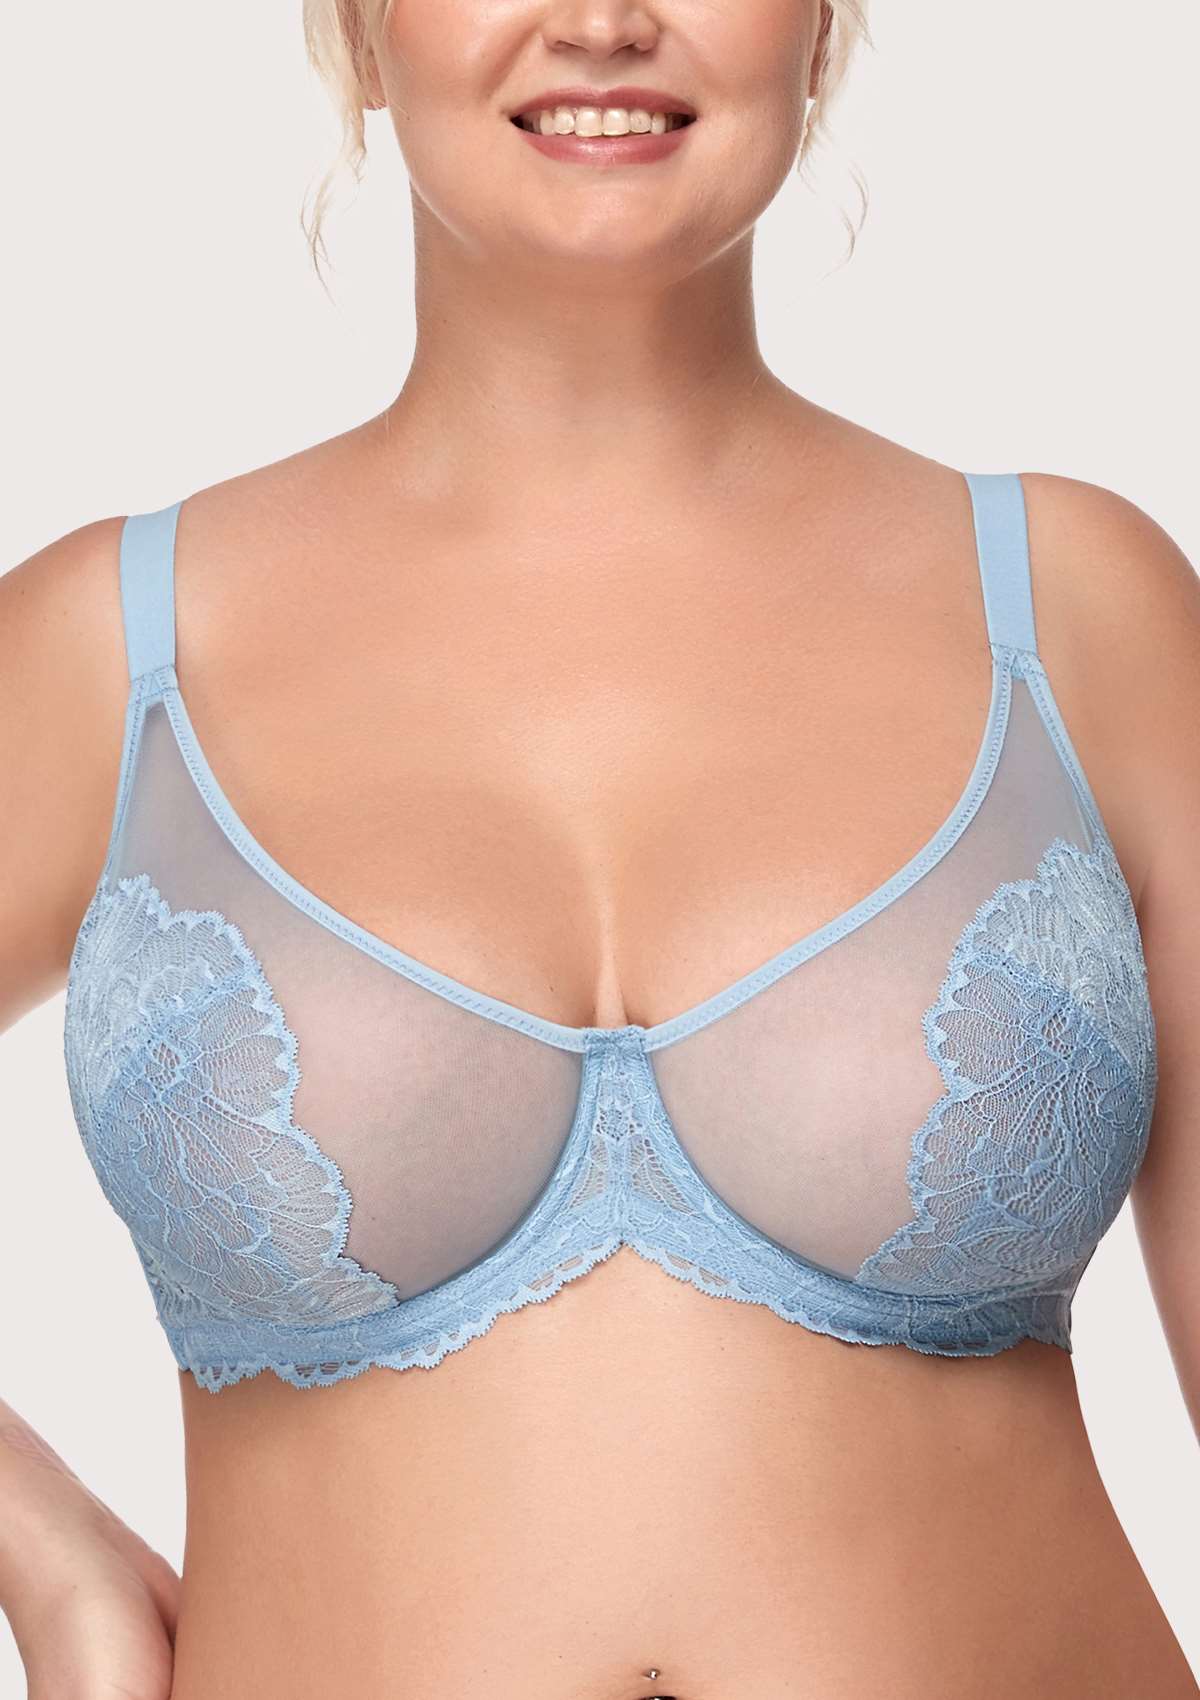 HSIA Blossom Full Coverage Supportive Unlined Underwire Bra Set - Storm Blue / 40 / DDD/F